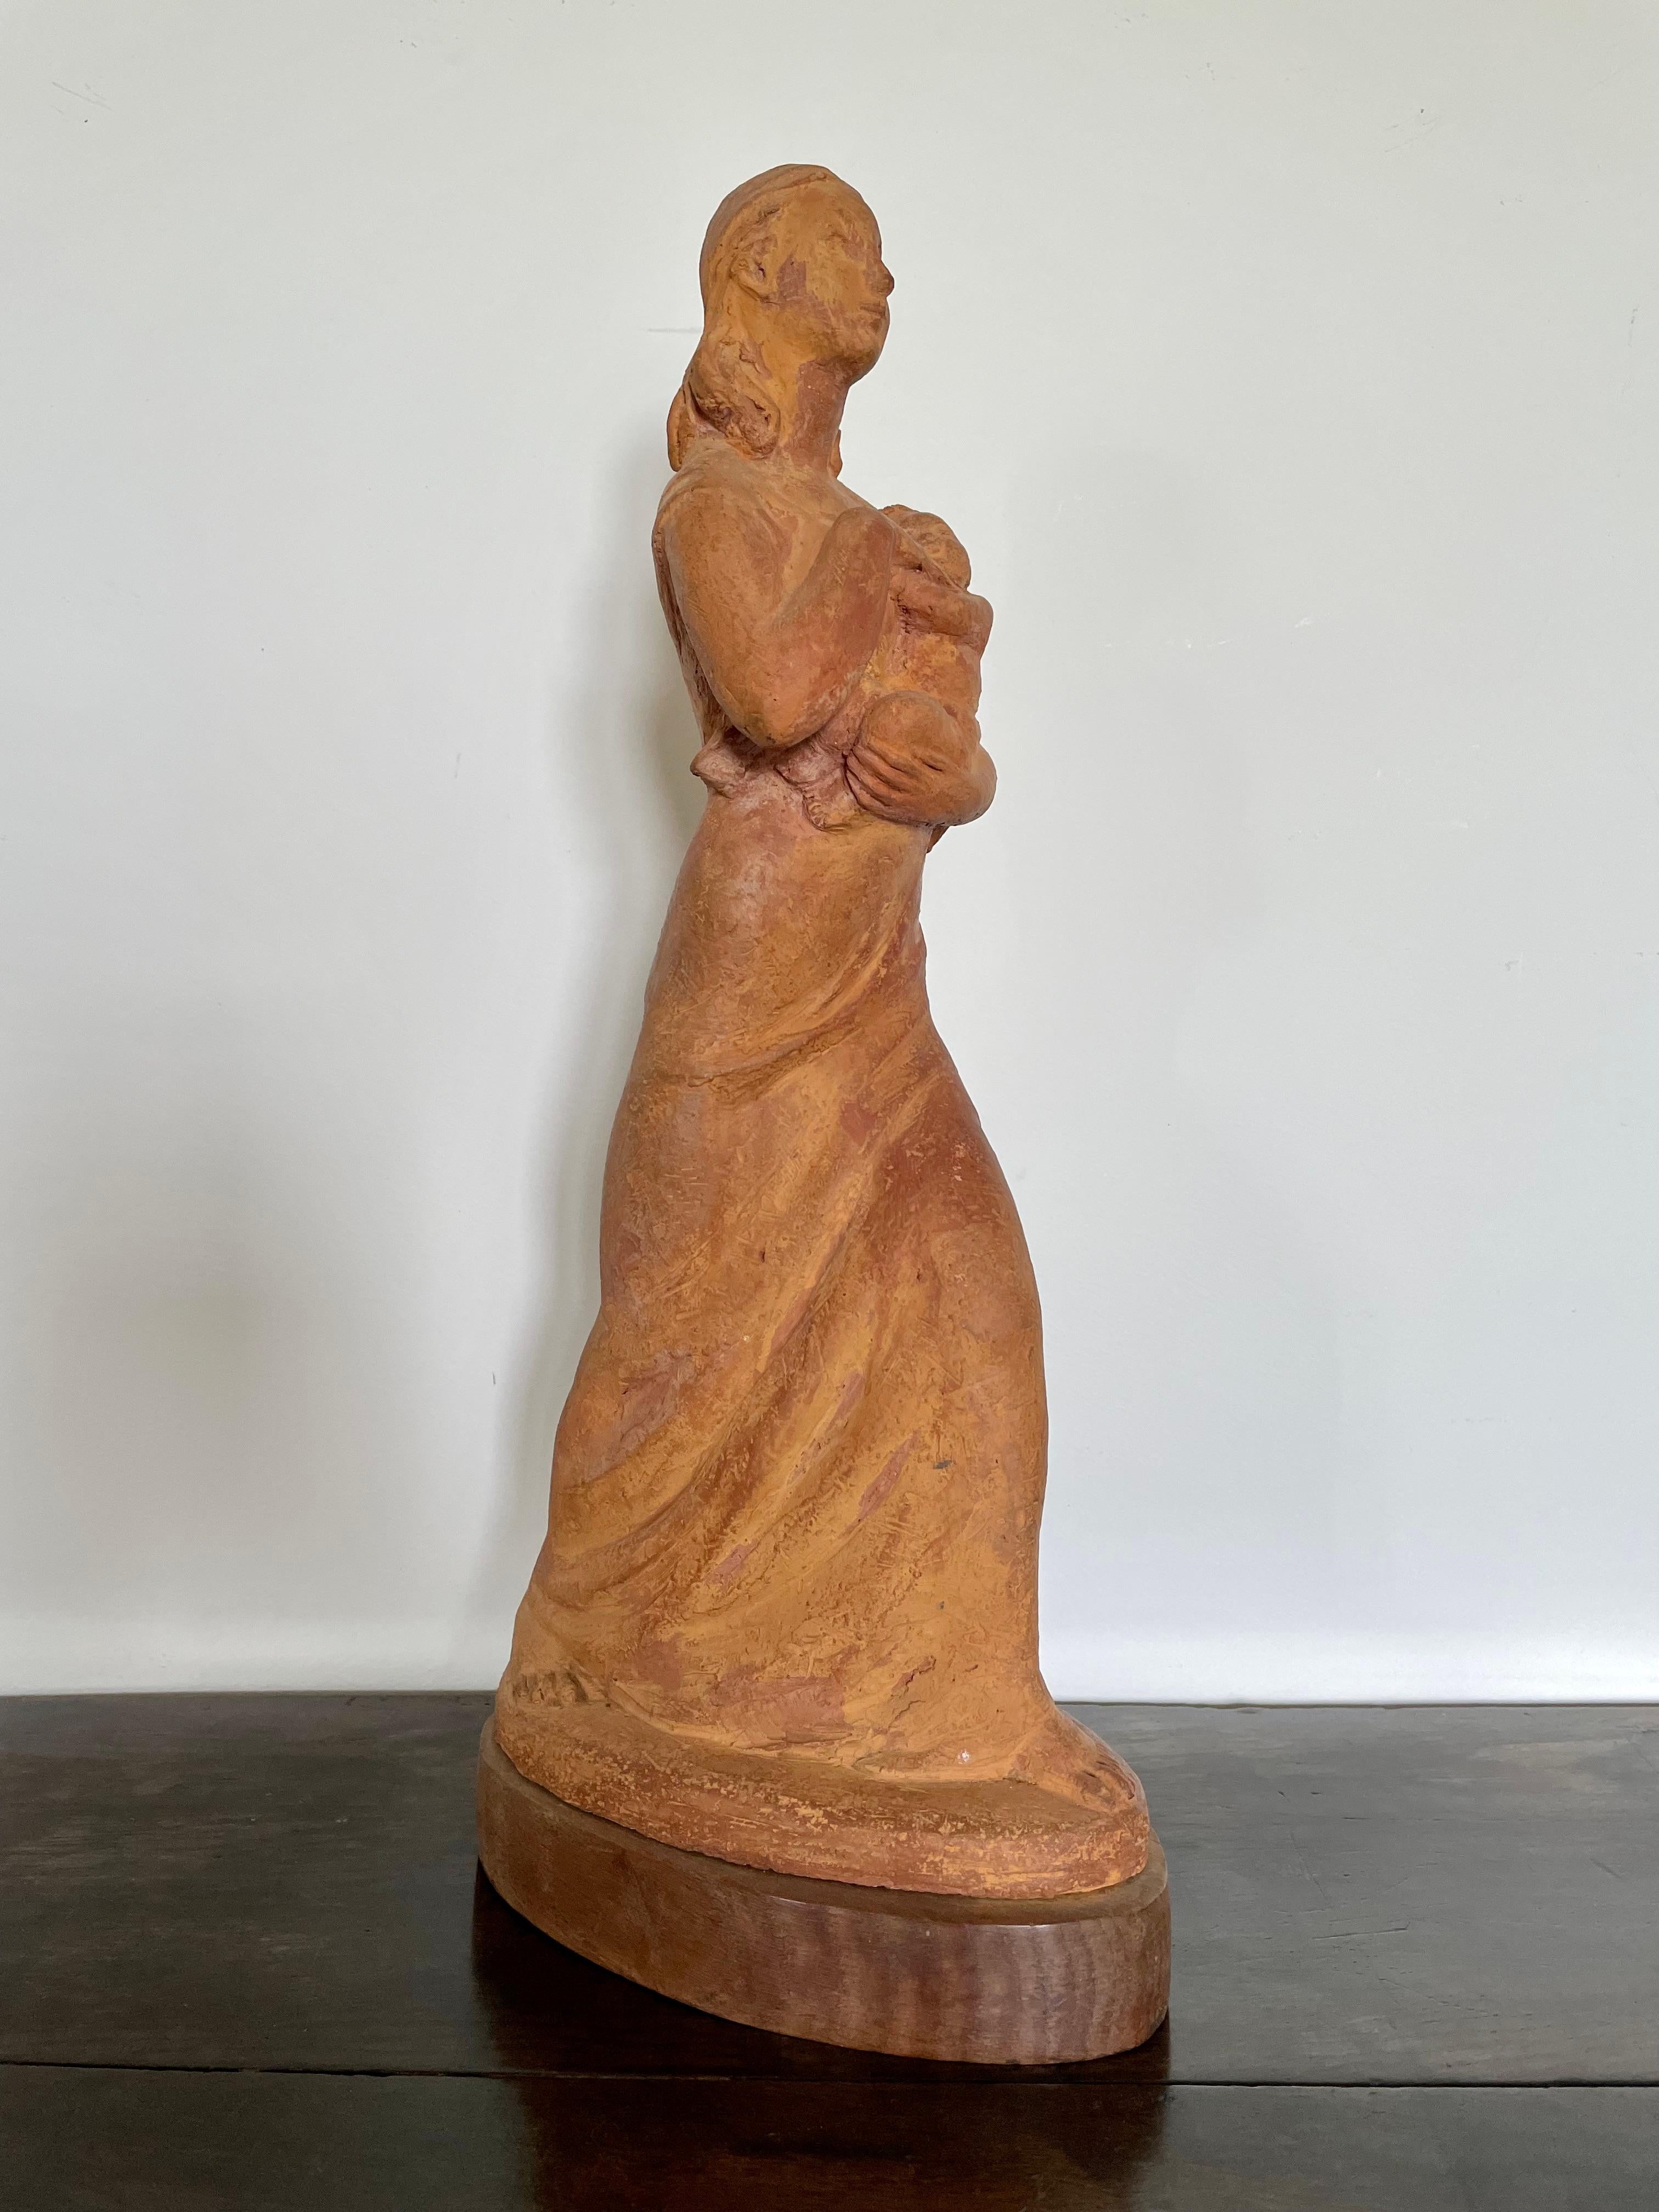 LADY MURIEL WHEELER, PSWA
(1888-1979)

Mother and Baby

Signed and indistinctly dated 19-4
Terracotta on wooden base

44 cm., 17 ¼ in. high including base

Muriel Bourne was born in Shrewsbury and studied at Wolverhampton School of Art.  In 1918 she